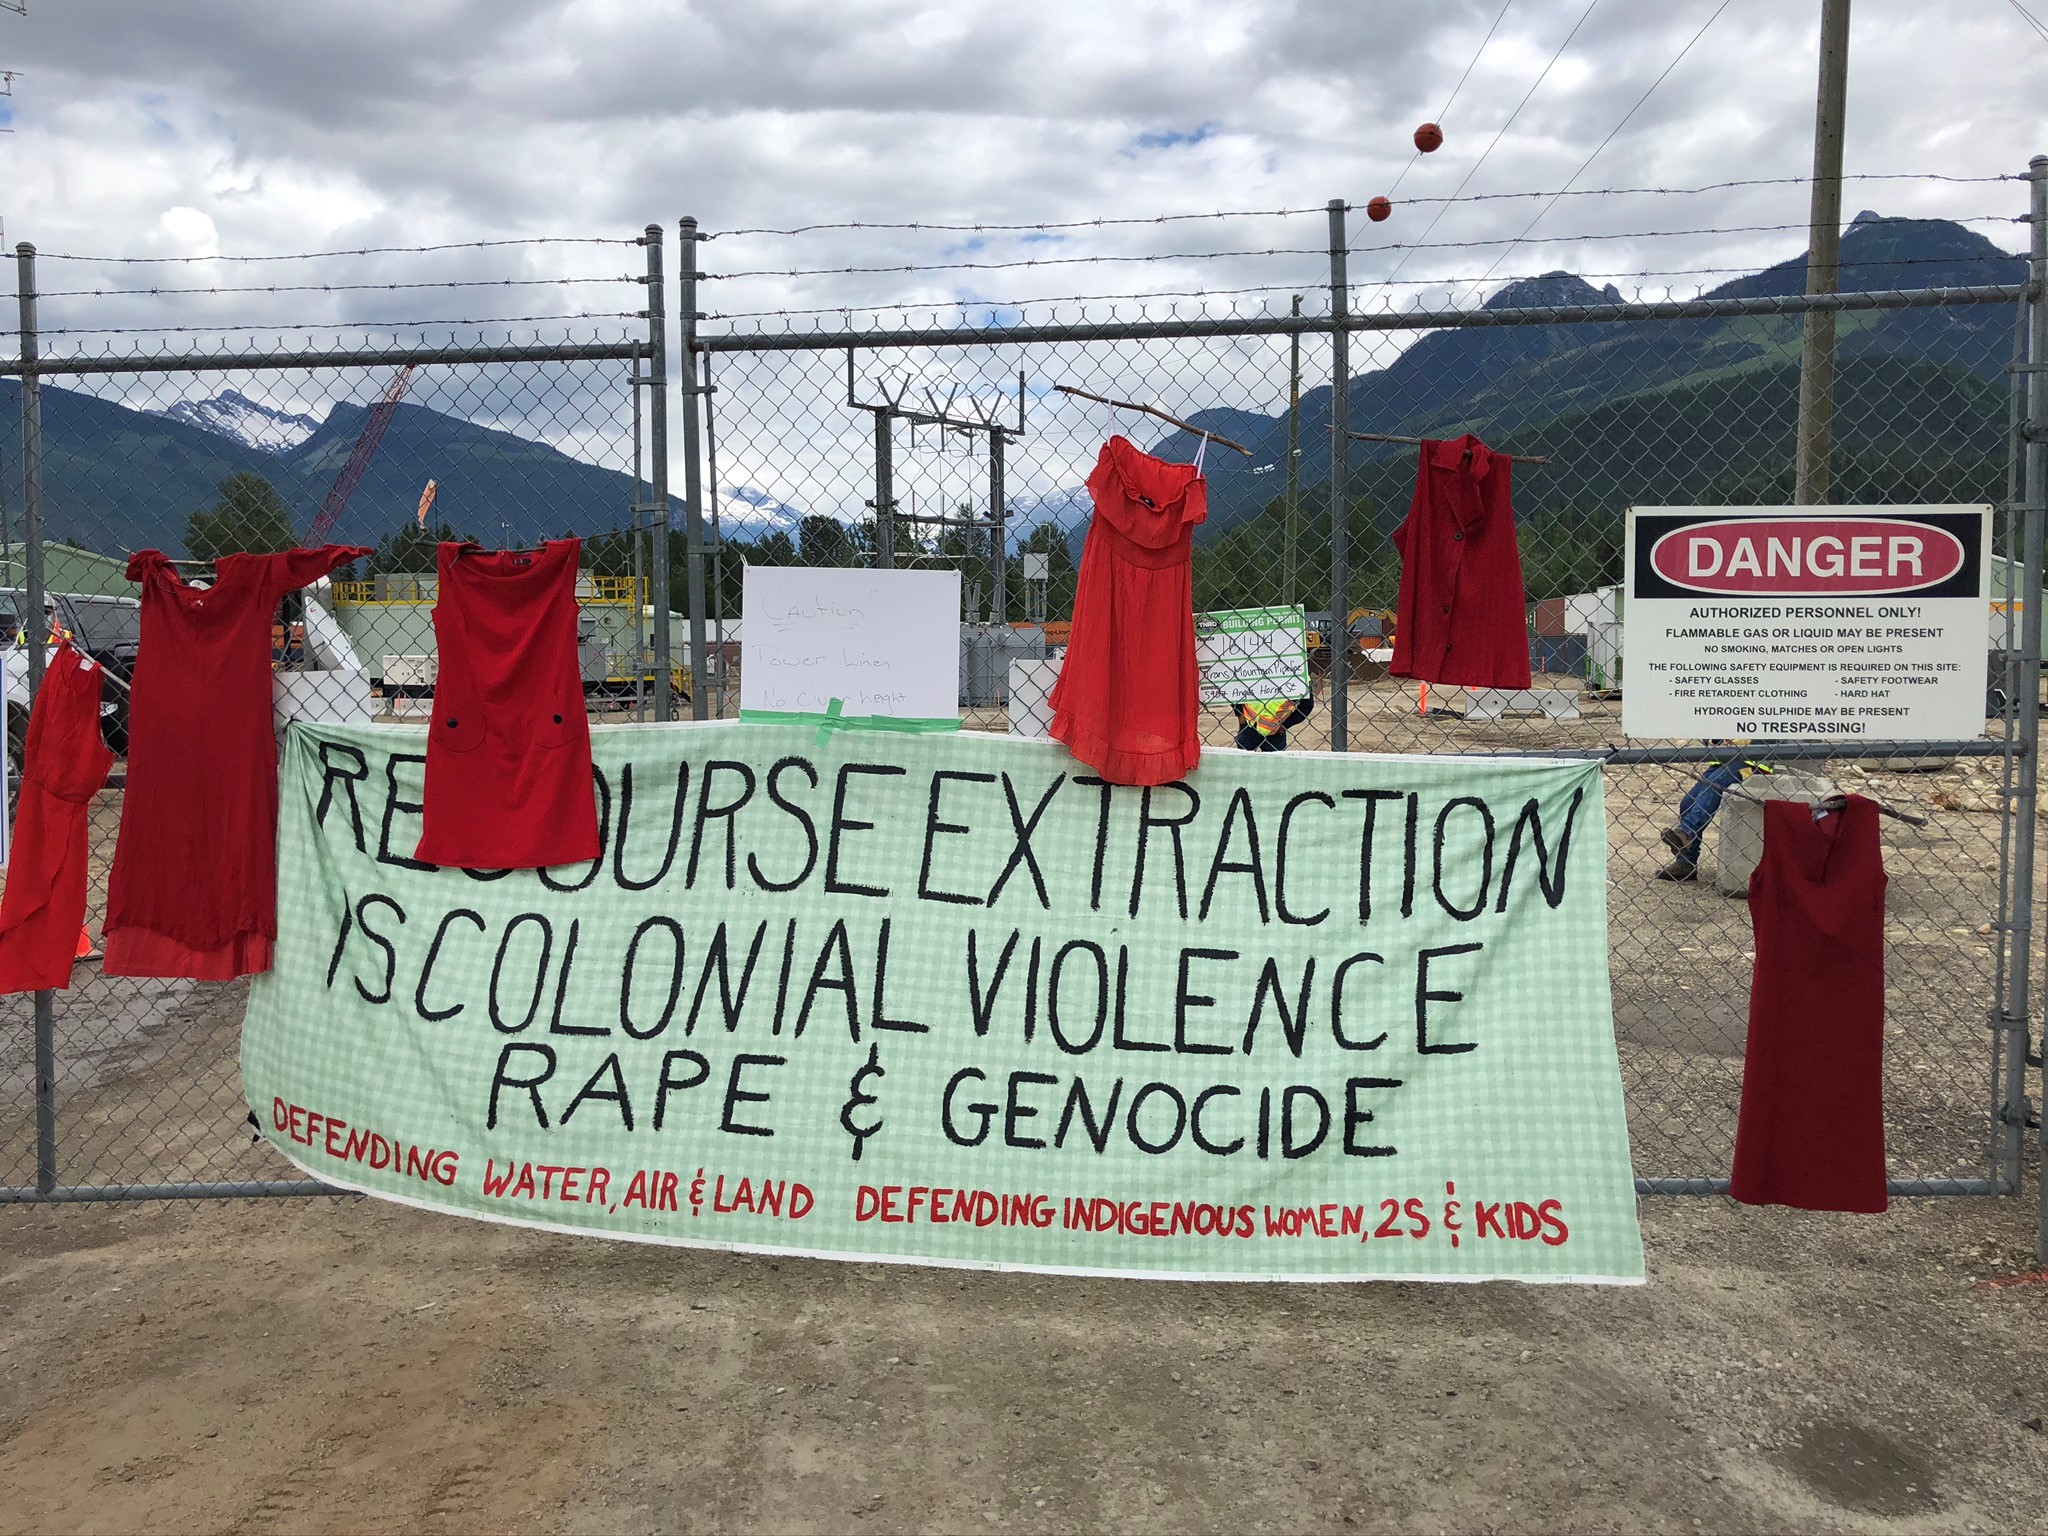 A protest banner tied to a barbed-wire fence reads "Resource extraction is colonial violence, rape and genocide."